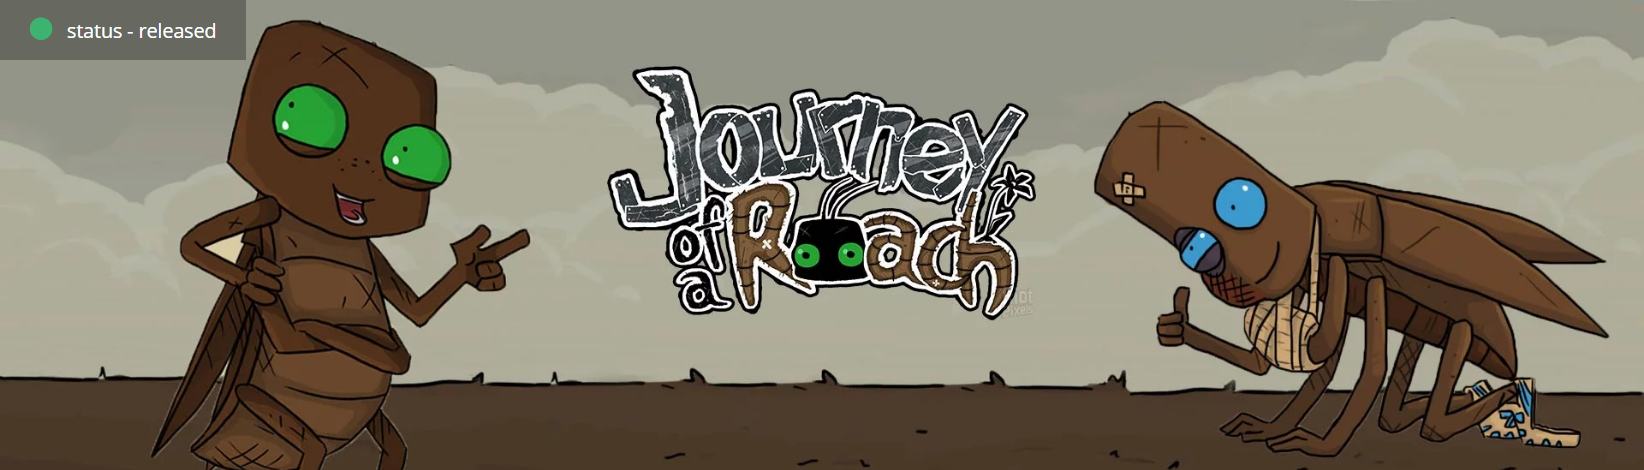 Screenshot_2019-09-13 Journey of a Roach Indiegala Developers.png